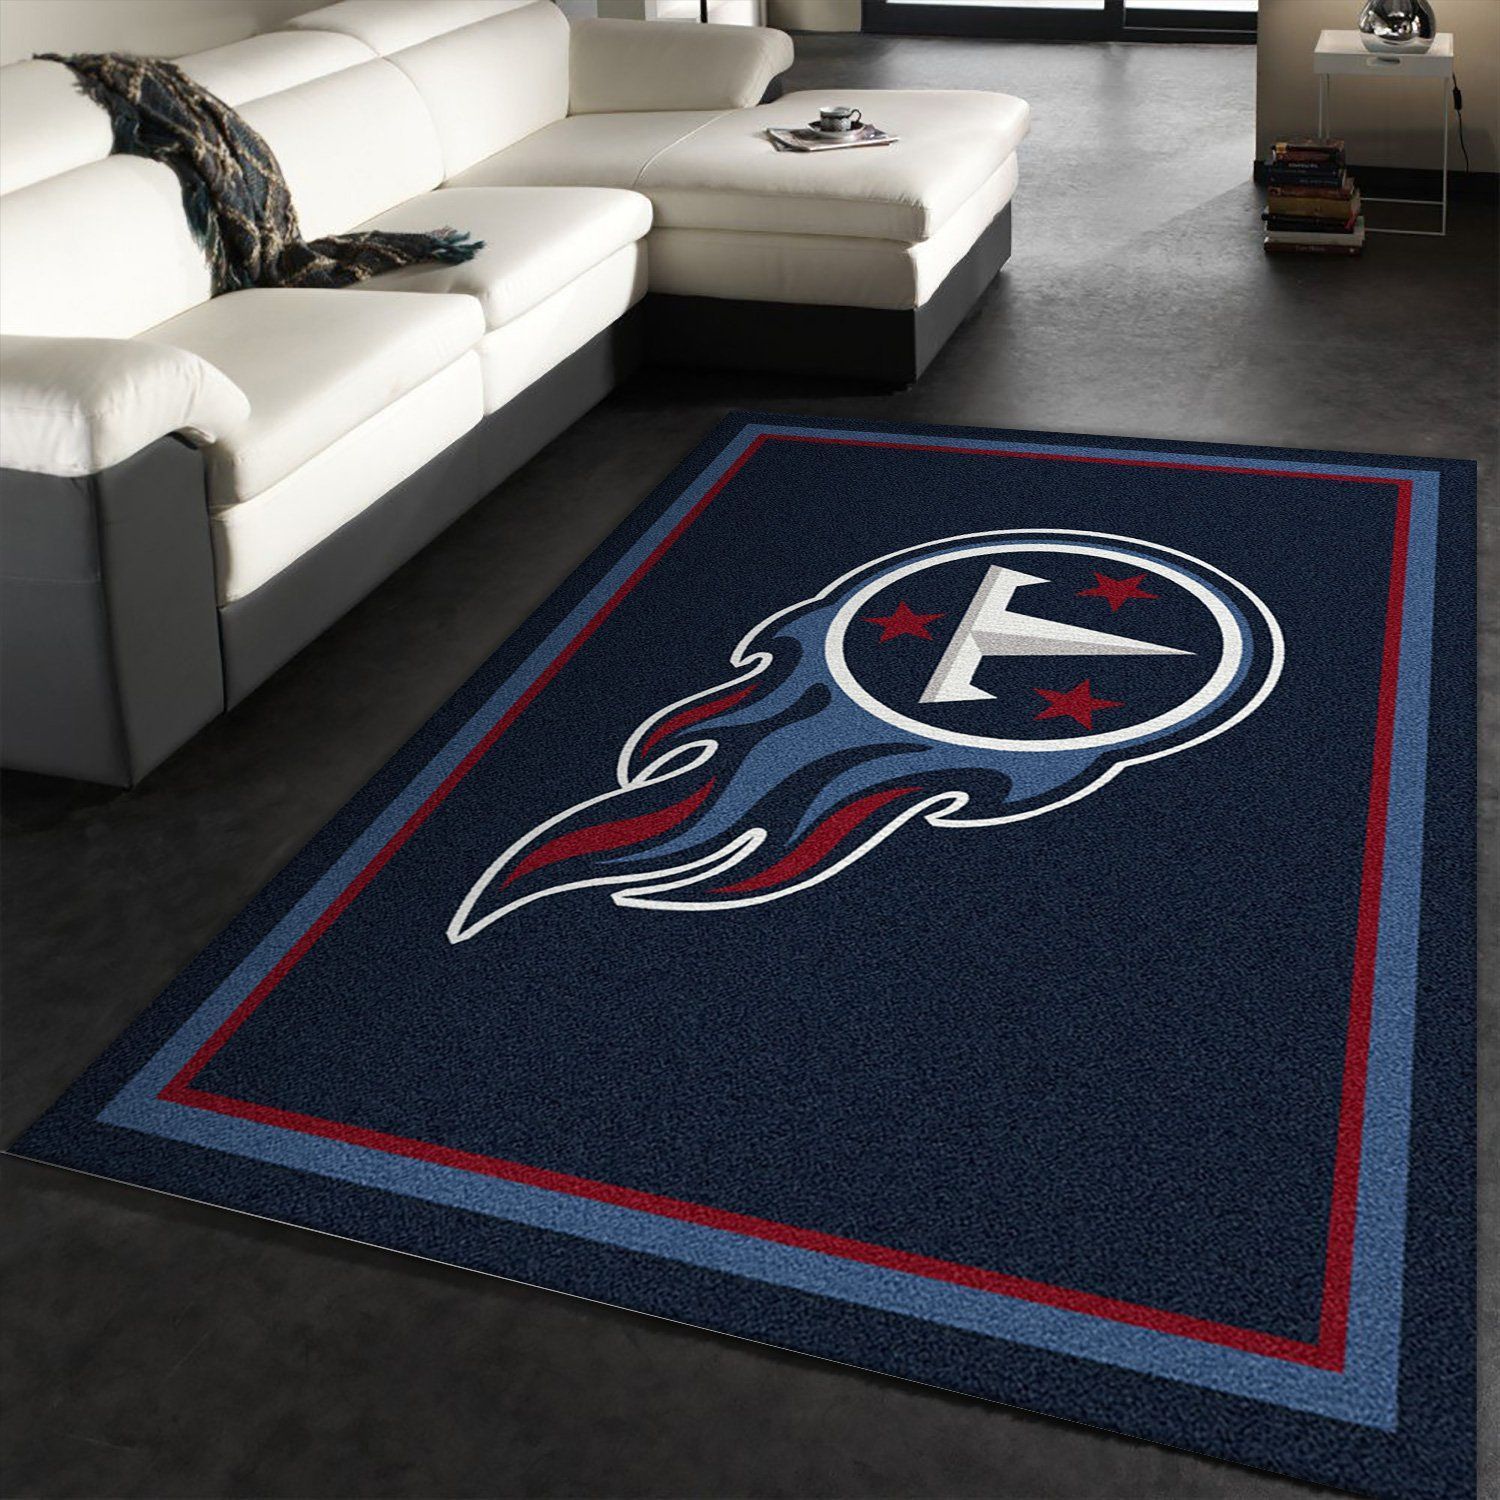 Nfl Spirit Tennessee Titans Area Rug For Christmas, Bedroom Rug, Home US Decor - Indoor Outdoor Rugs 1